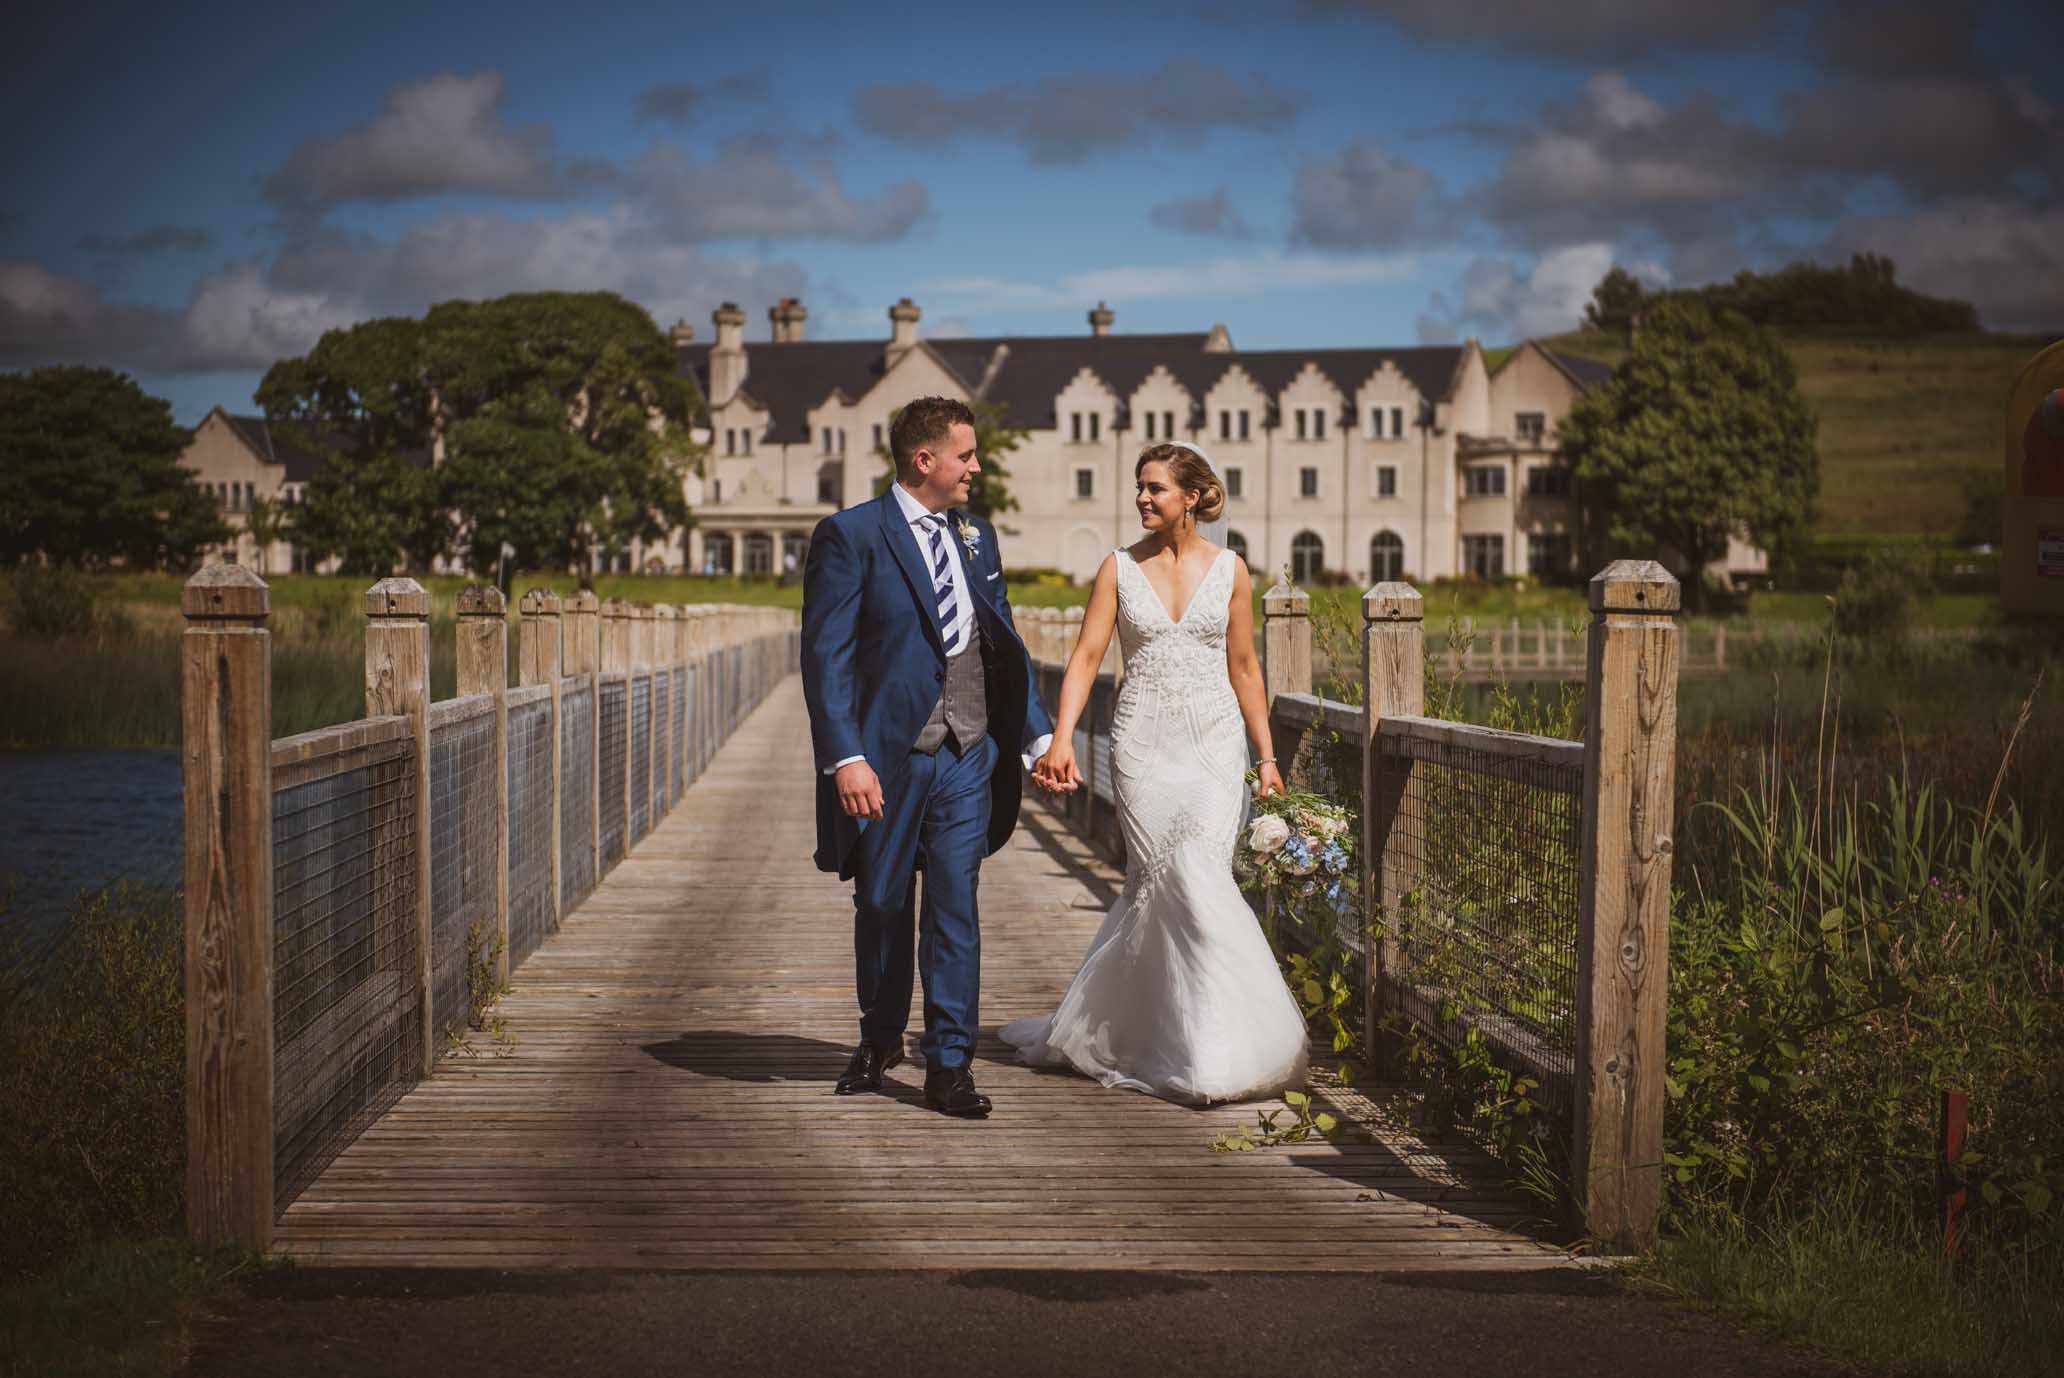 Lough Erne Resort - our lovely couple enjoy a stroll across the foot bridge over Lake Hume